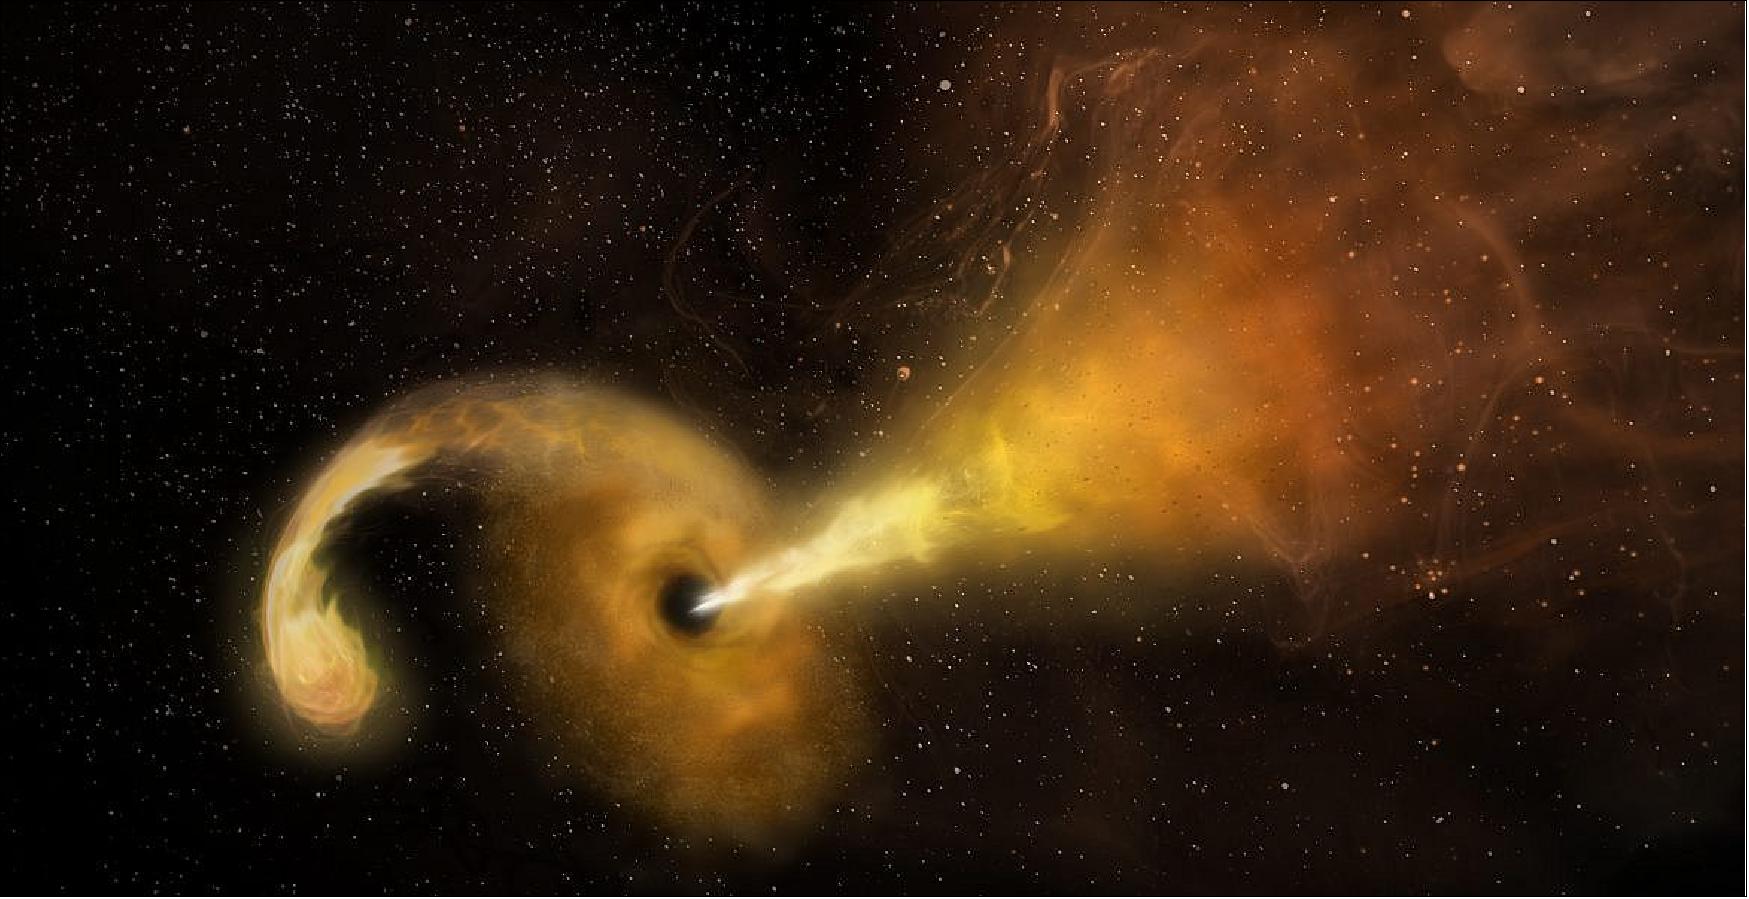 Figure 28: Artist's conception of a Tidal Disruption Event (TDE) — a star being shredded by the powerful gravity of a supermassive black hole. Material from the star spirals into a disk rotating around the black hole, and a jet of particles is ejected (image credit: Sophia Dagnello, NRAO/AUI/NSF)